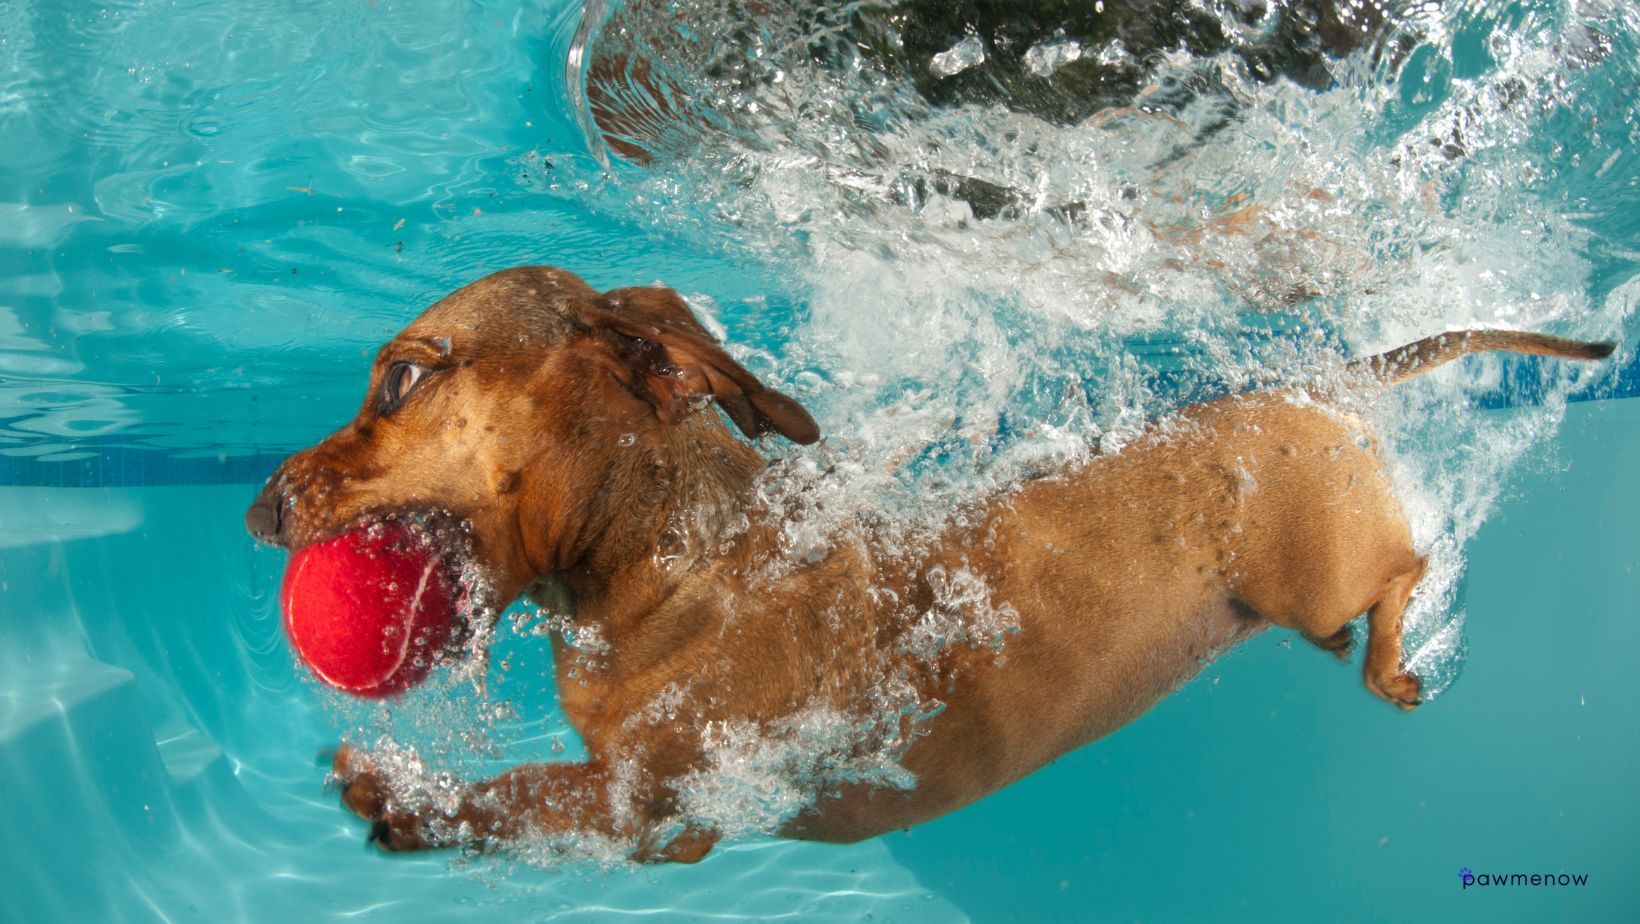 How do dogs know to hold their breath underwater